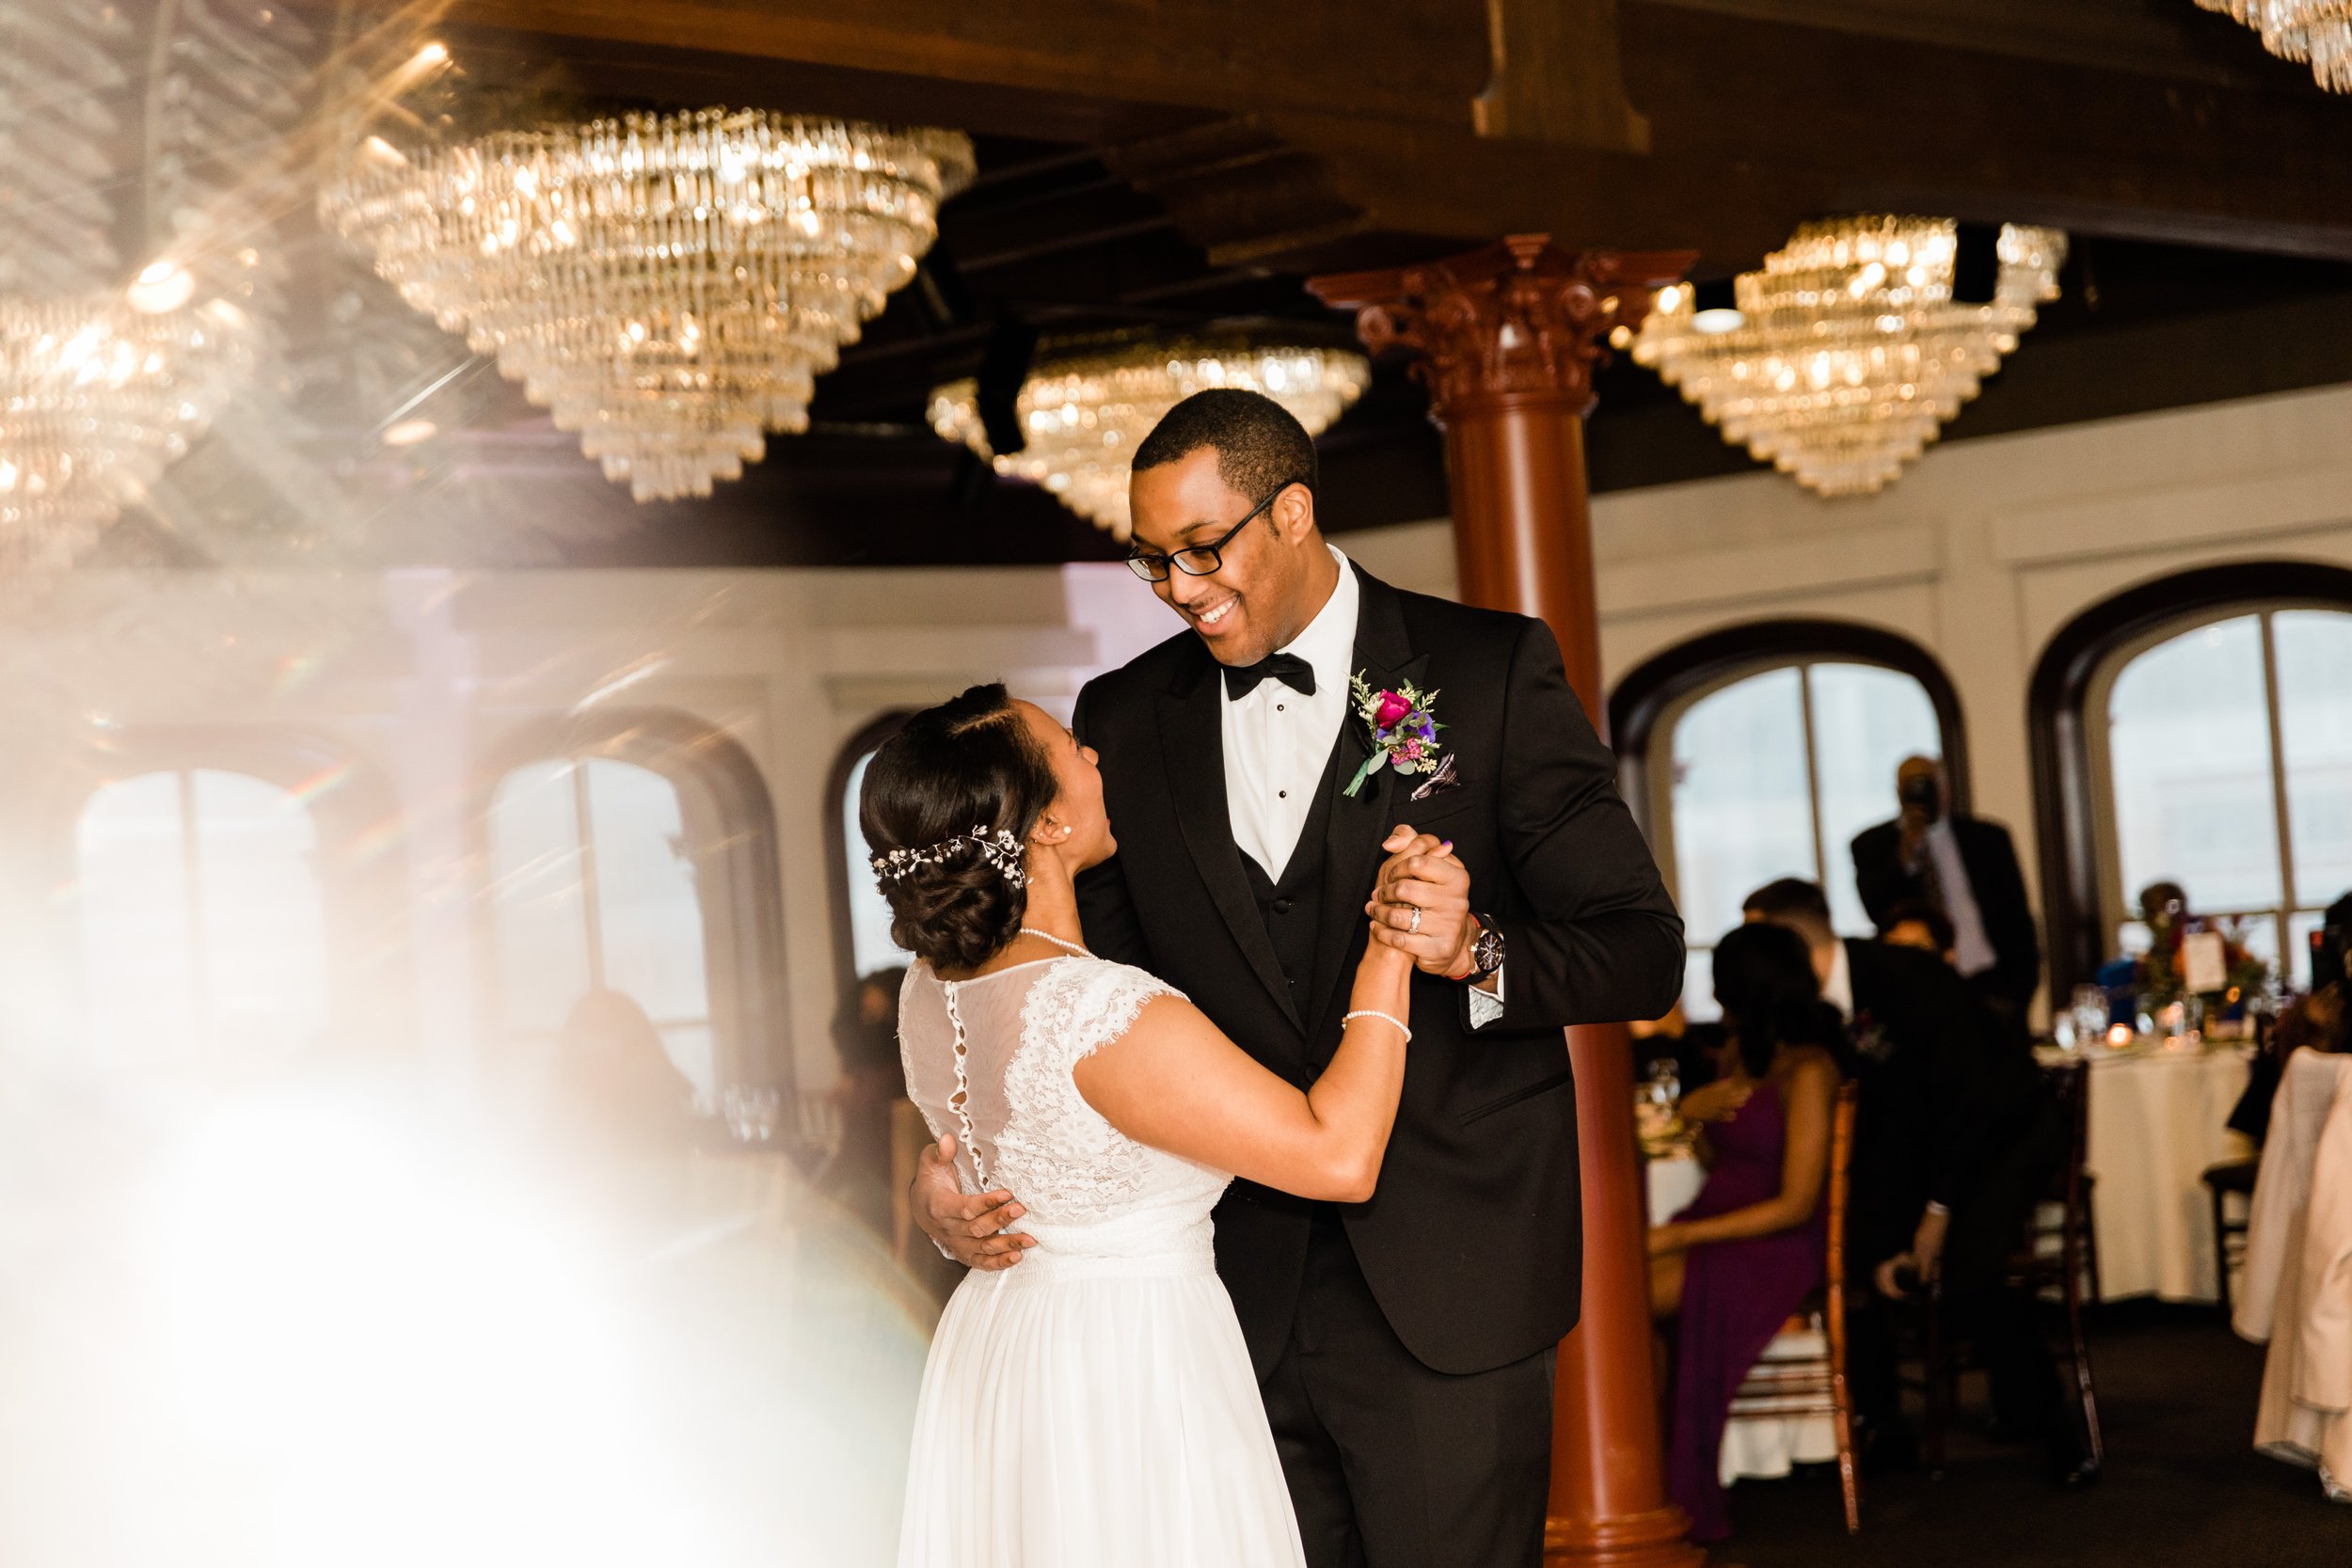 Snowy Winter Wedding at 1840's Plaza in Baltimore City Megapixels Media Photography-60.jpg